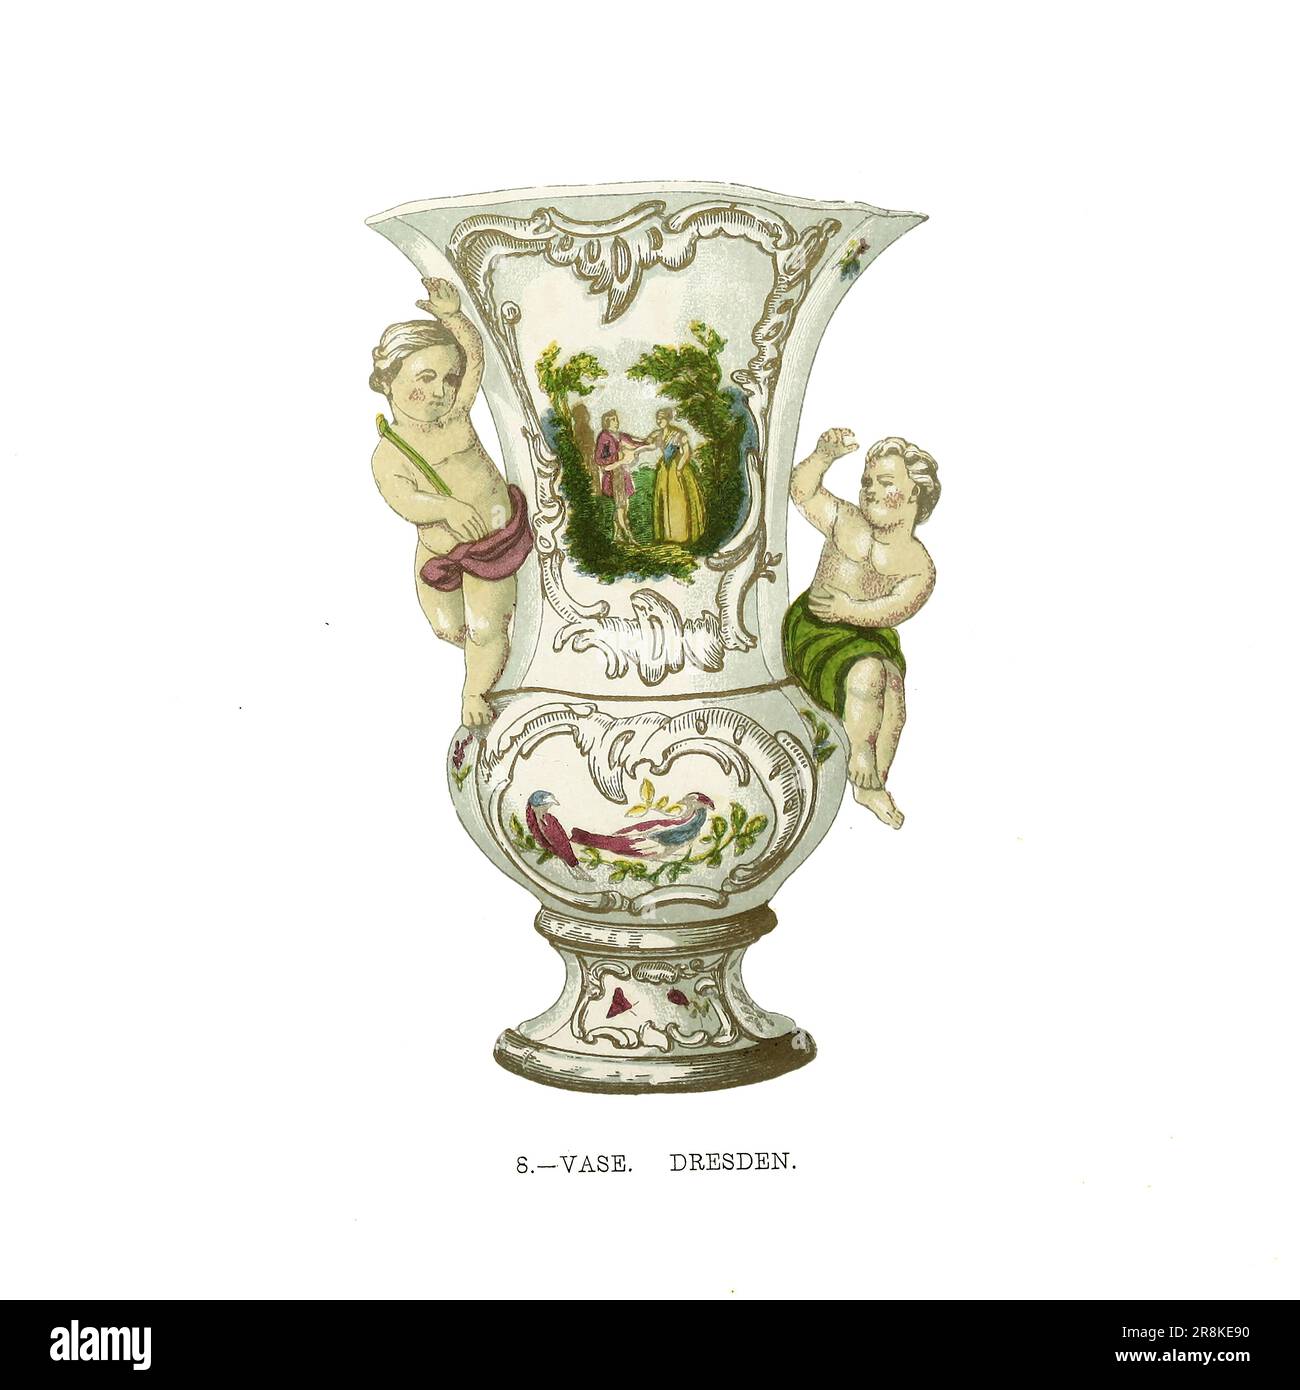 Vase Dresden from the book ' A history of pottery and porcelain, mediaeval and modern ' by Joseph Marryat, Published in London by John Murray, Albemarle Street in 1857 Stock Photo